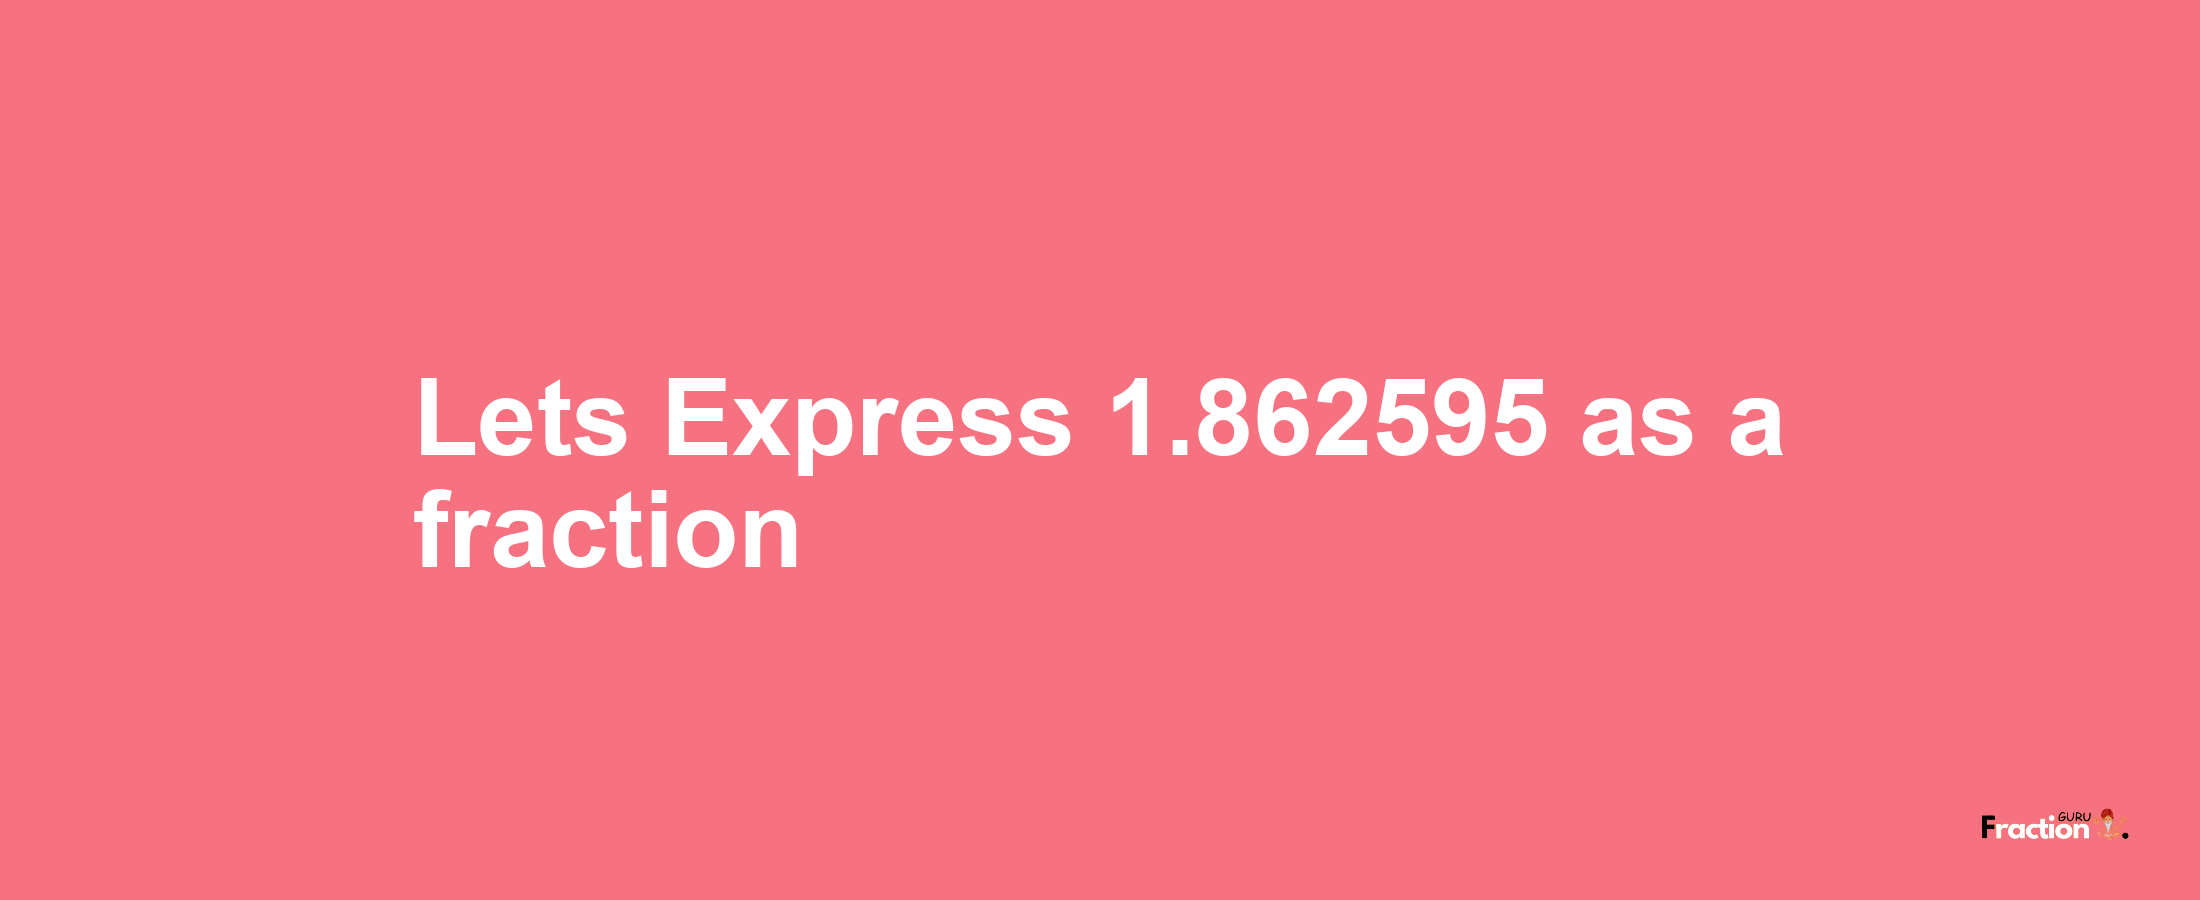 Lets Express 1.862595 as afraction